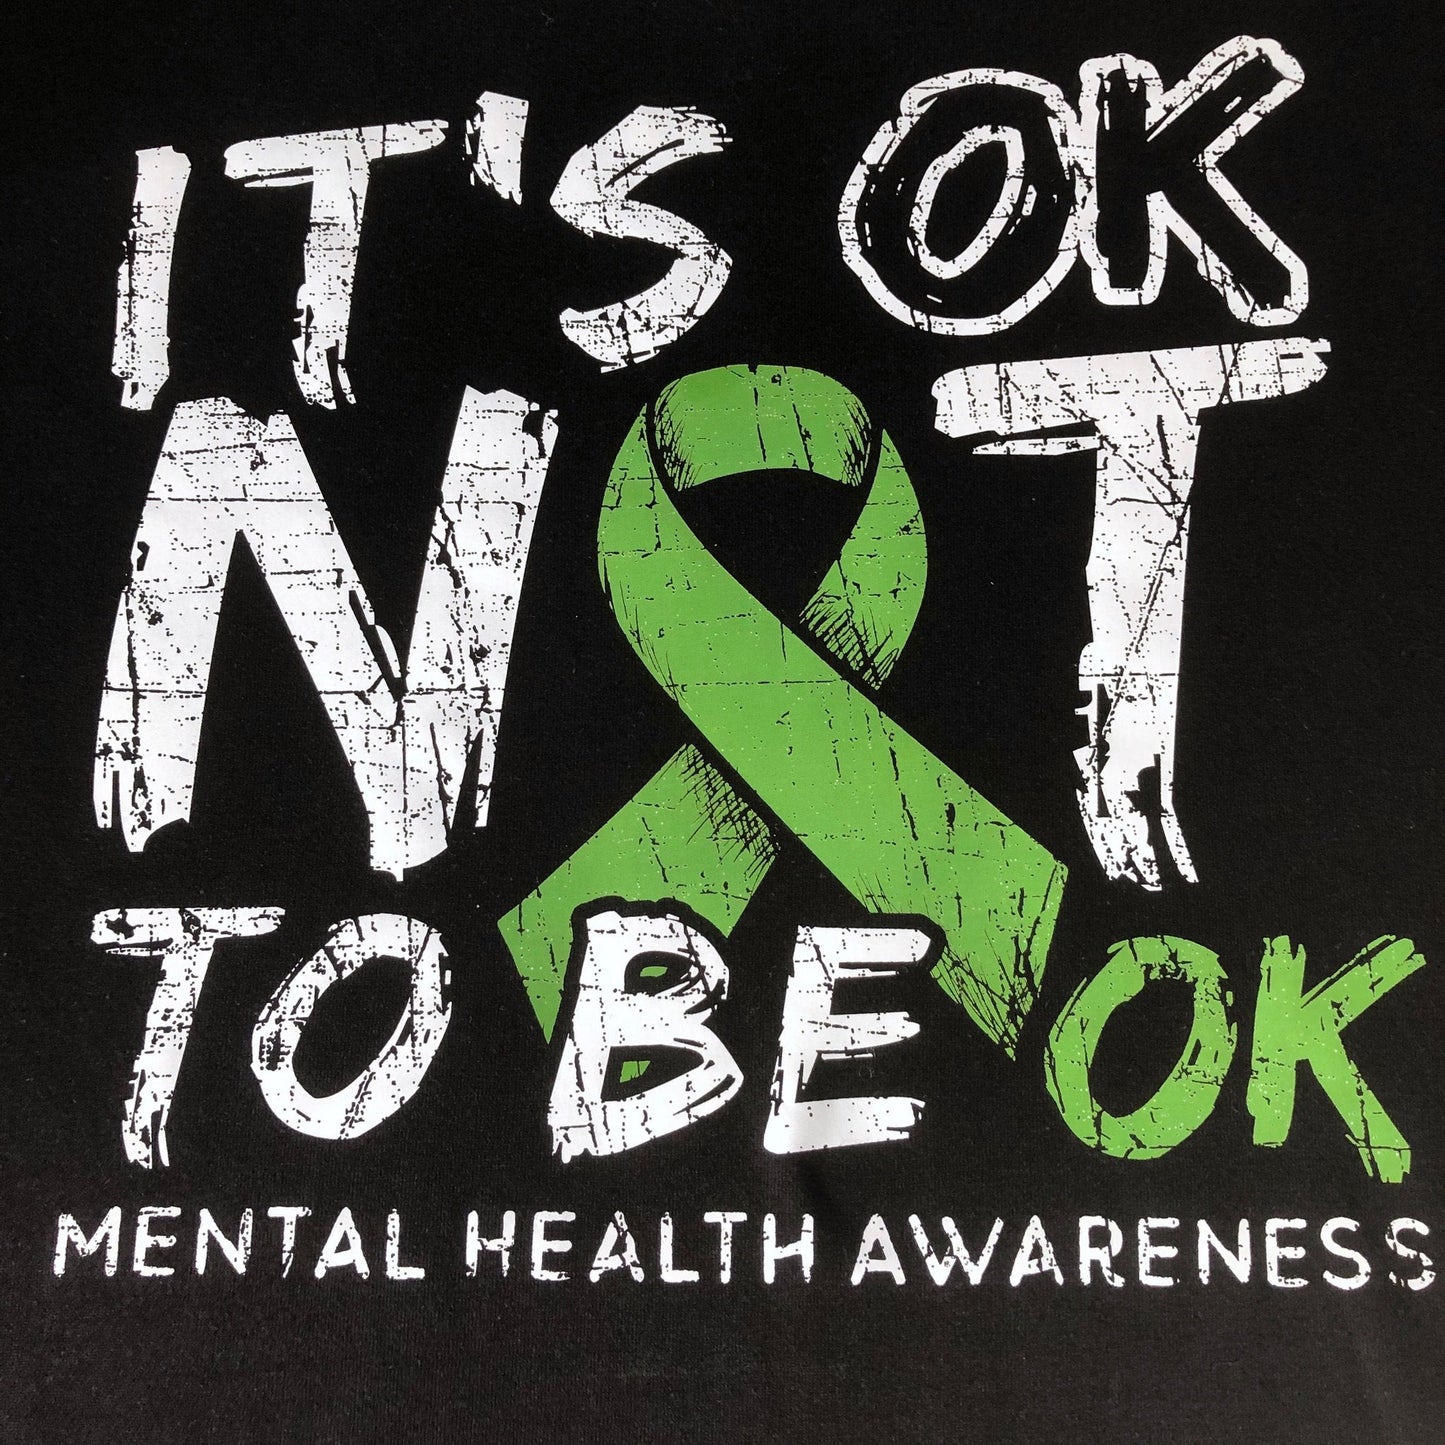 Mental Health Awareness Tote Bag, It&#39;s OK Not To Be OK, Reusable Shopping Carrier Bag